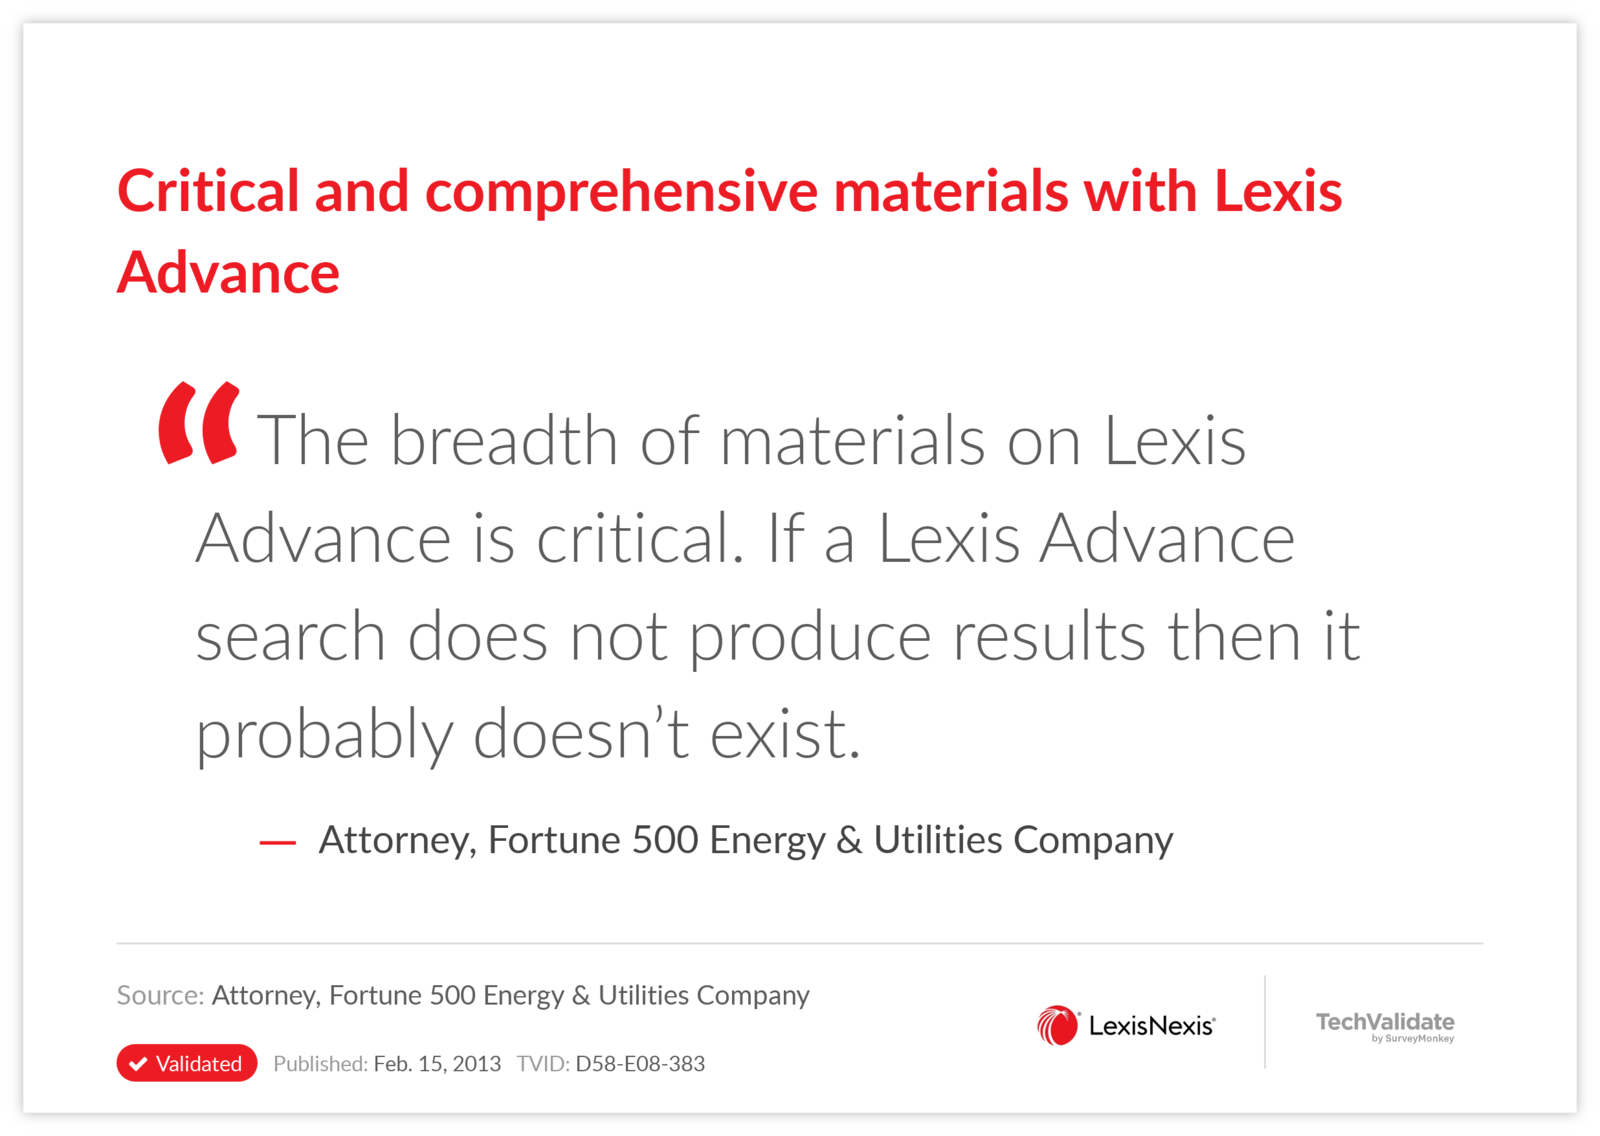 Critical and comprehensive materials with Lexis Advance